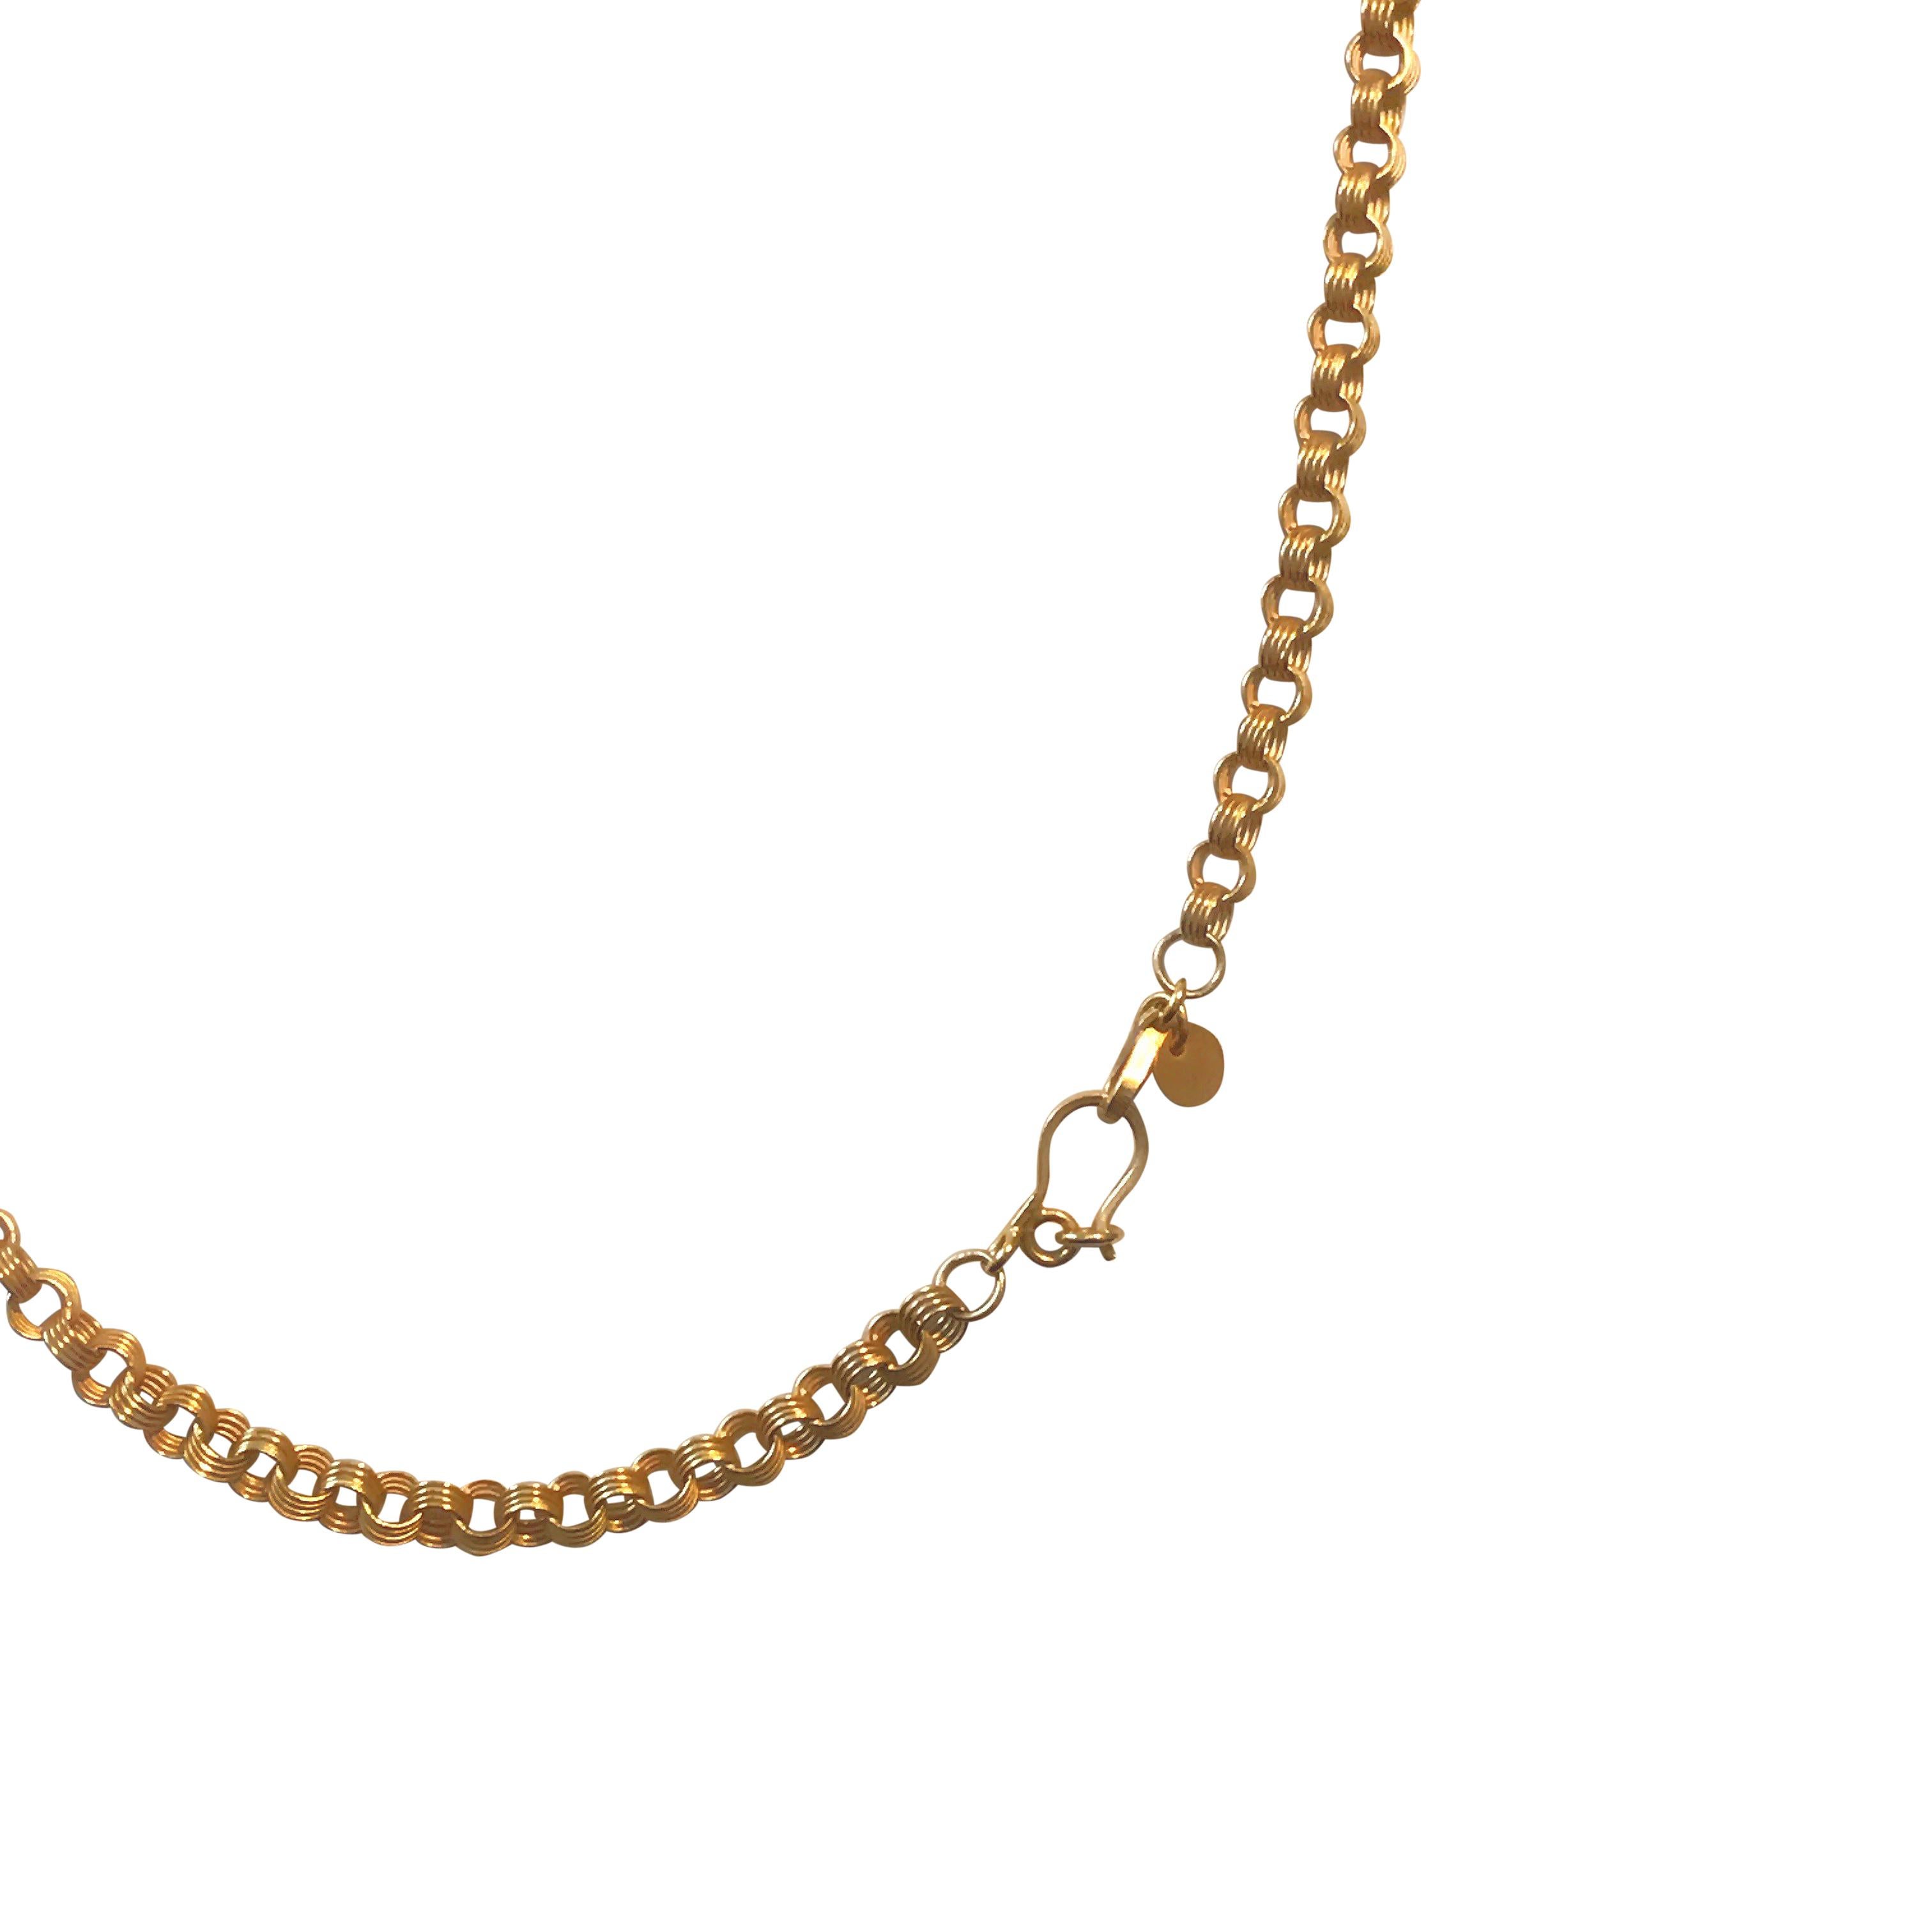 Timeless and elegant handmade solid yellow gold necklace with a beautiful handcrafted secure clasp in a satin finish. 
Ideal to wear by itself or with large pendants. 
Hallmark: London’s Goldsmiths’ Company – Assay Office
Length: 50.00 cm
Weight: